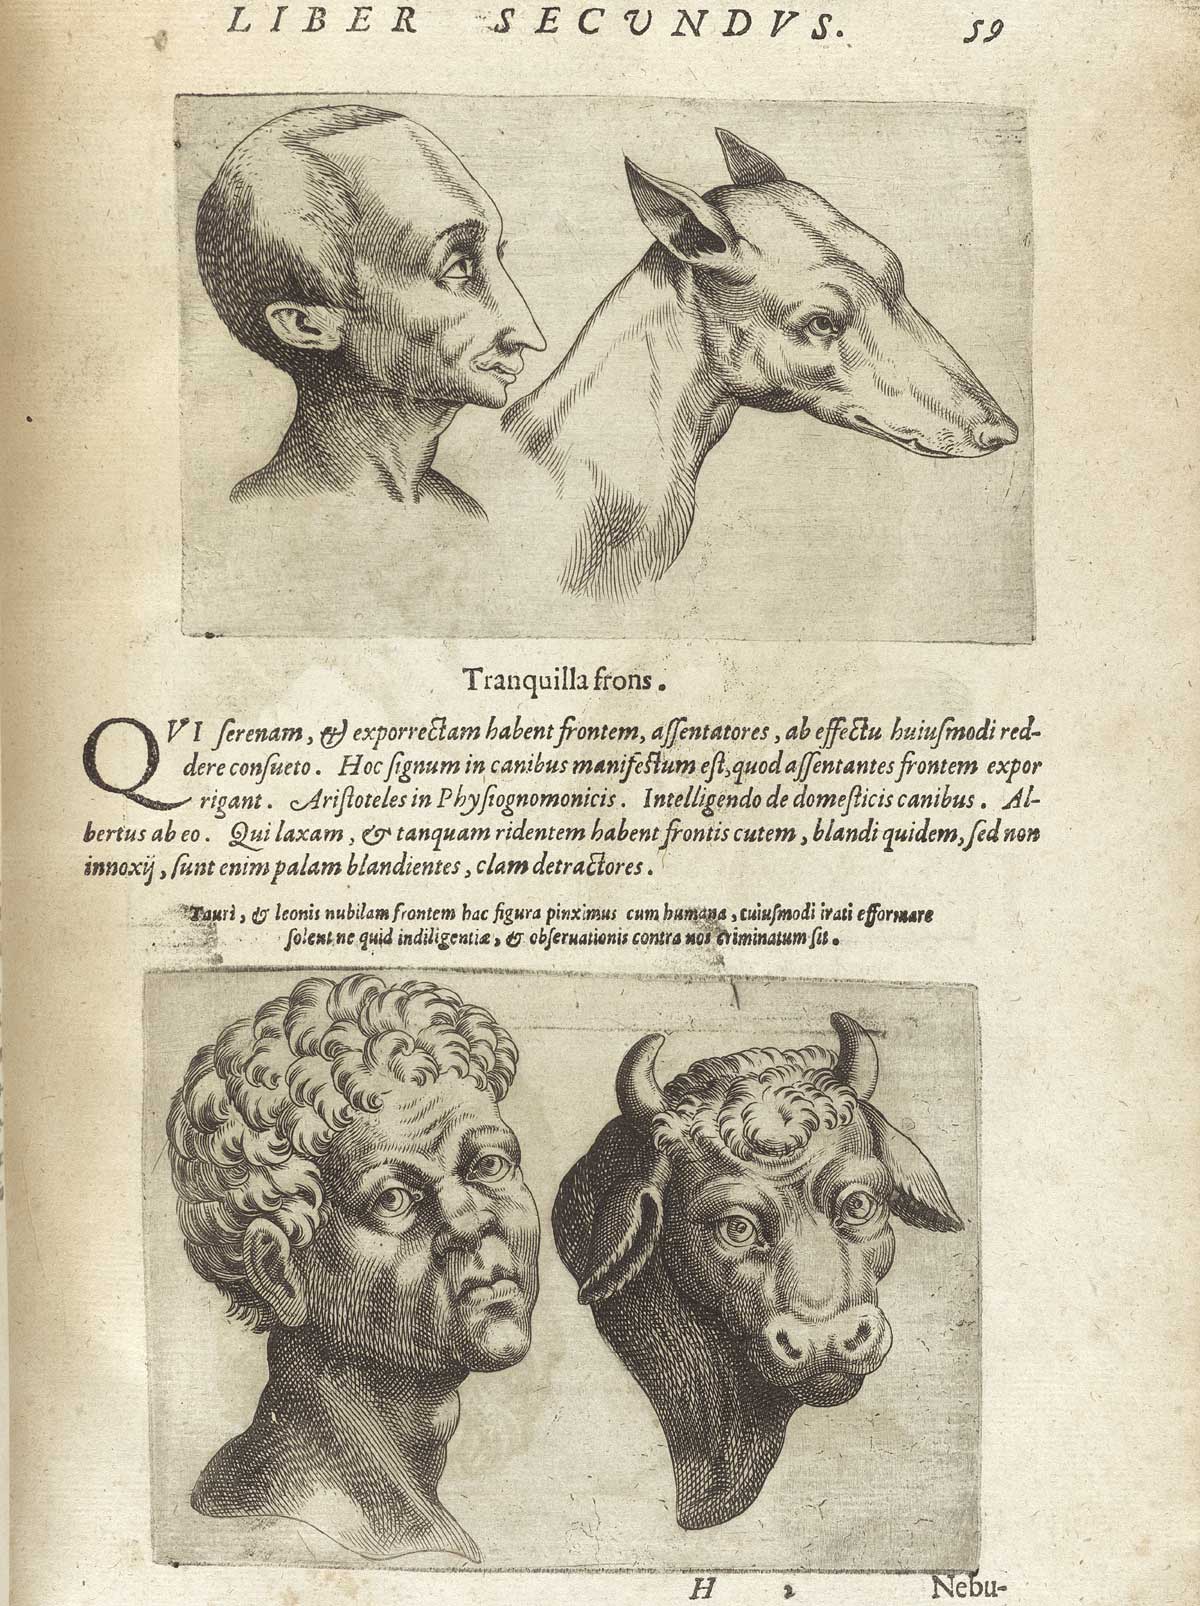 Page 59 of Giambattista della Porta's De humana physiognomonia libri IIII, featuring an upper and lower image. In the top image has the head and shoulders right side view of a man with a long nose and forehead and a dog. The bottom image has the head and shoulders front view of man on the left and a bull on the right.